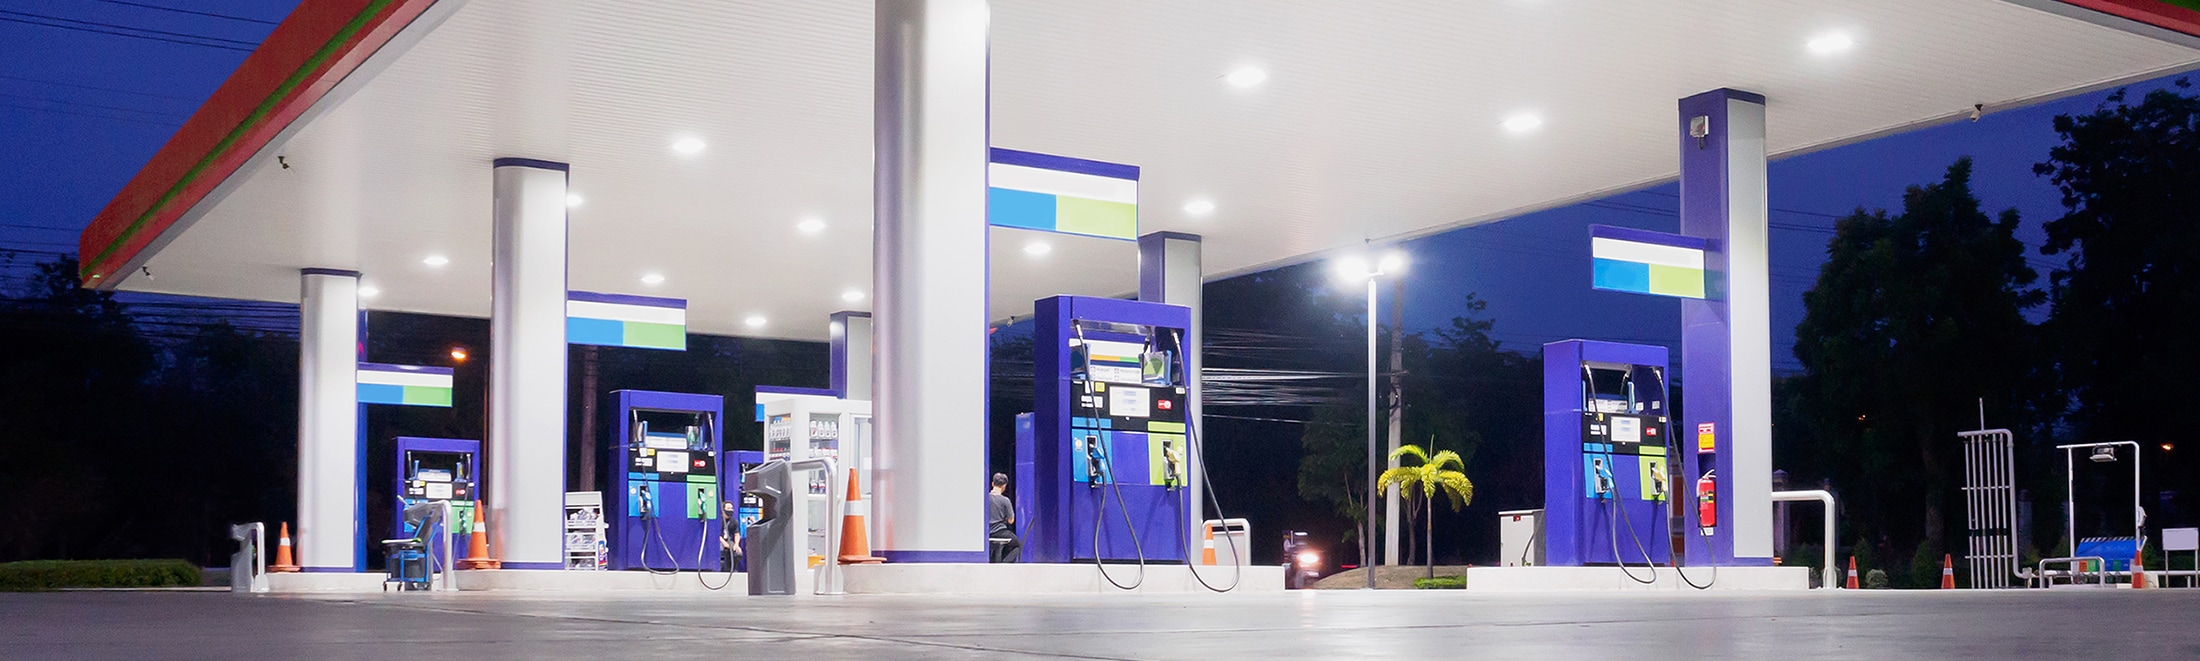 What Type of Gas is Best for My Car? | Bobby Rahal Toyota in Mechanicsburg, PA | Blue gas station at night